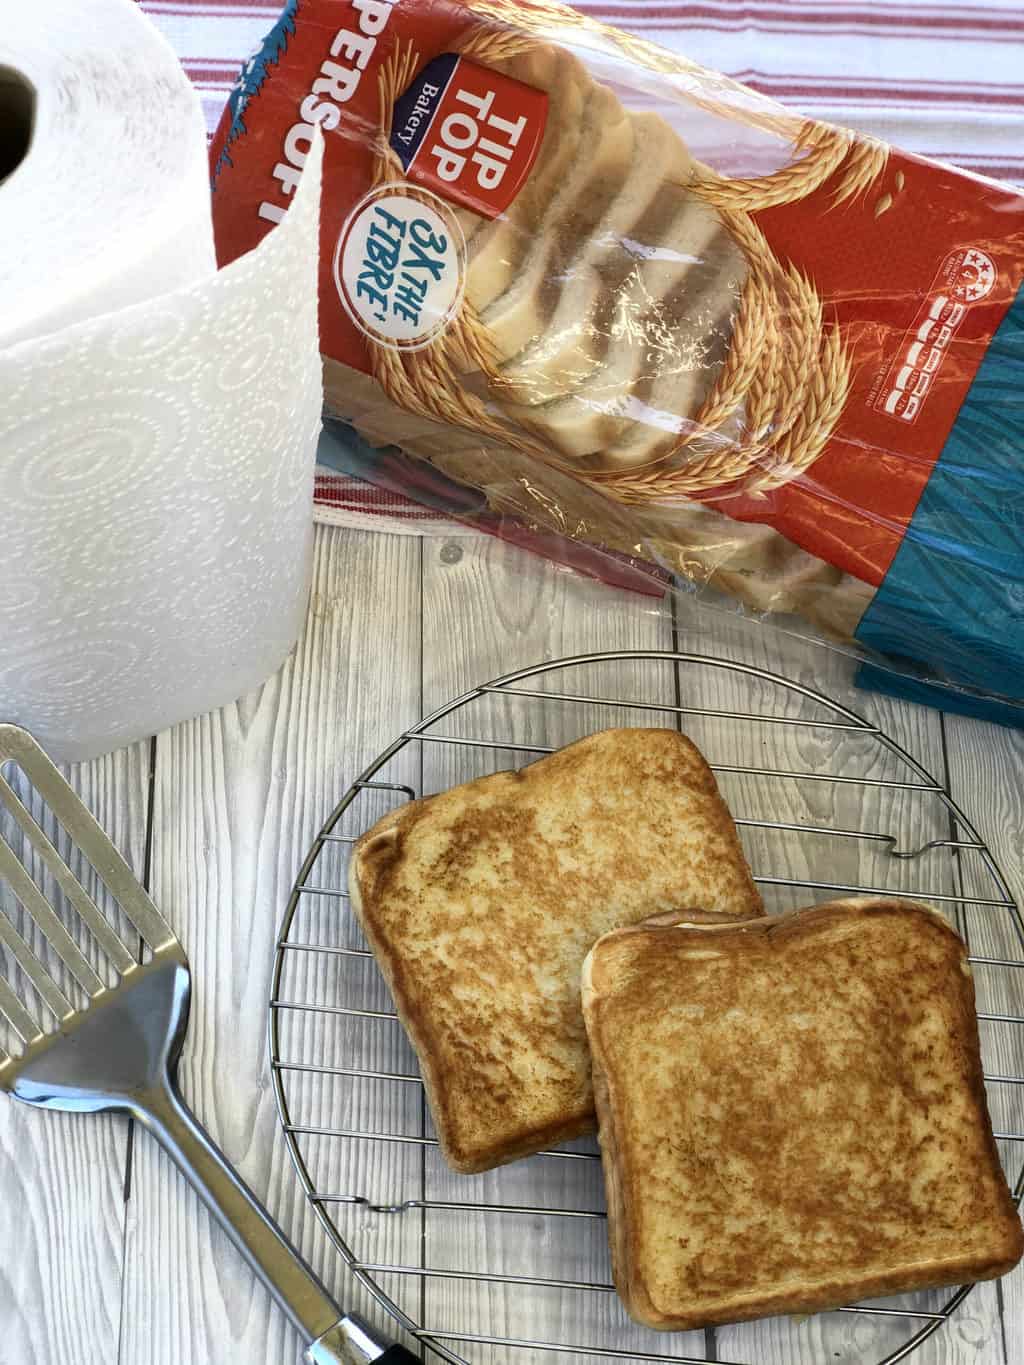 Cool the toasted sandwiches on a wire rack before wrapping 